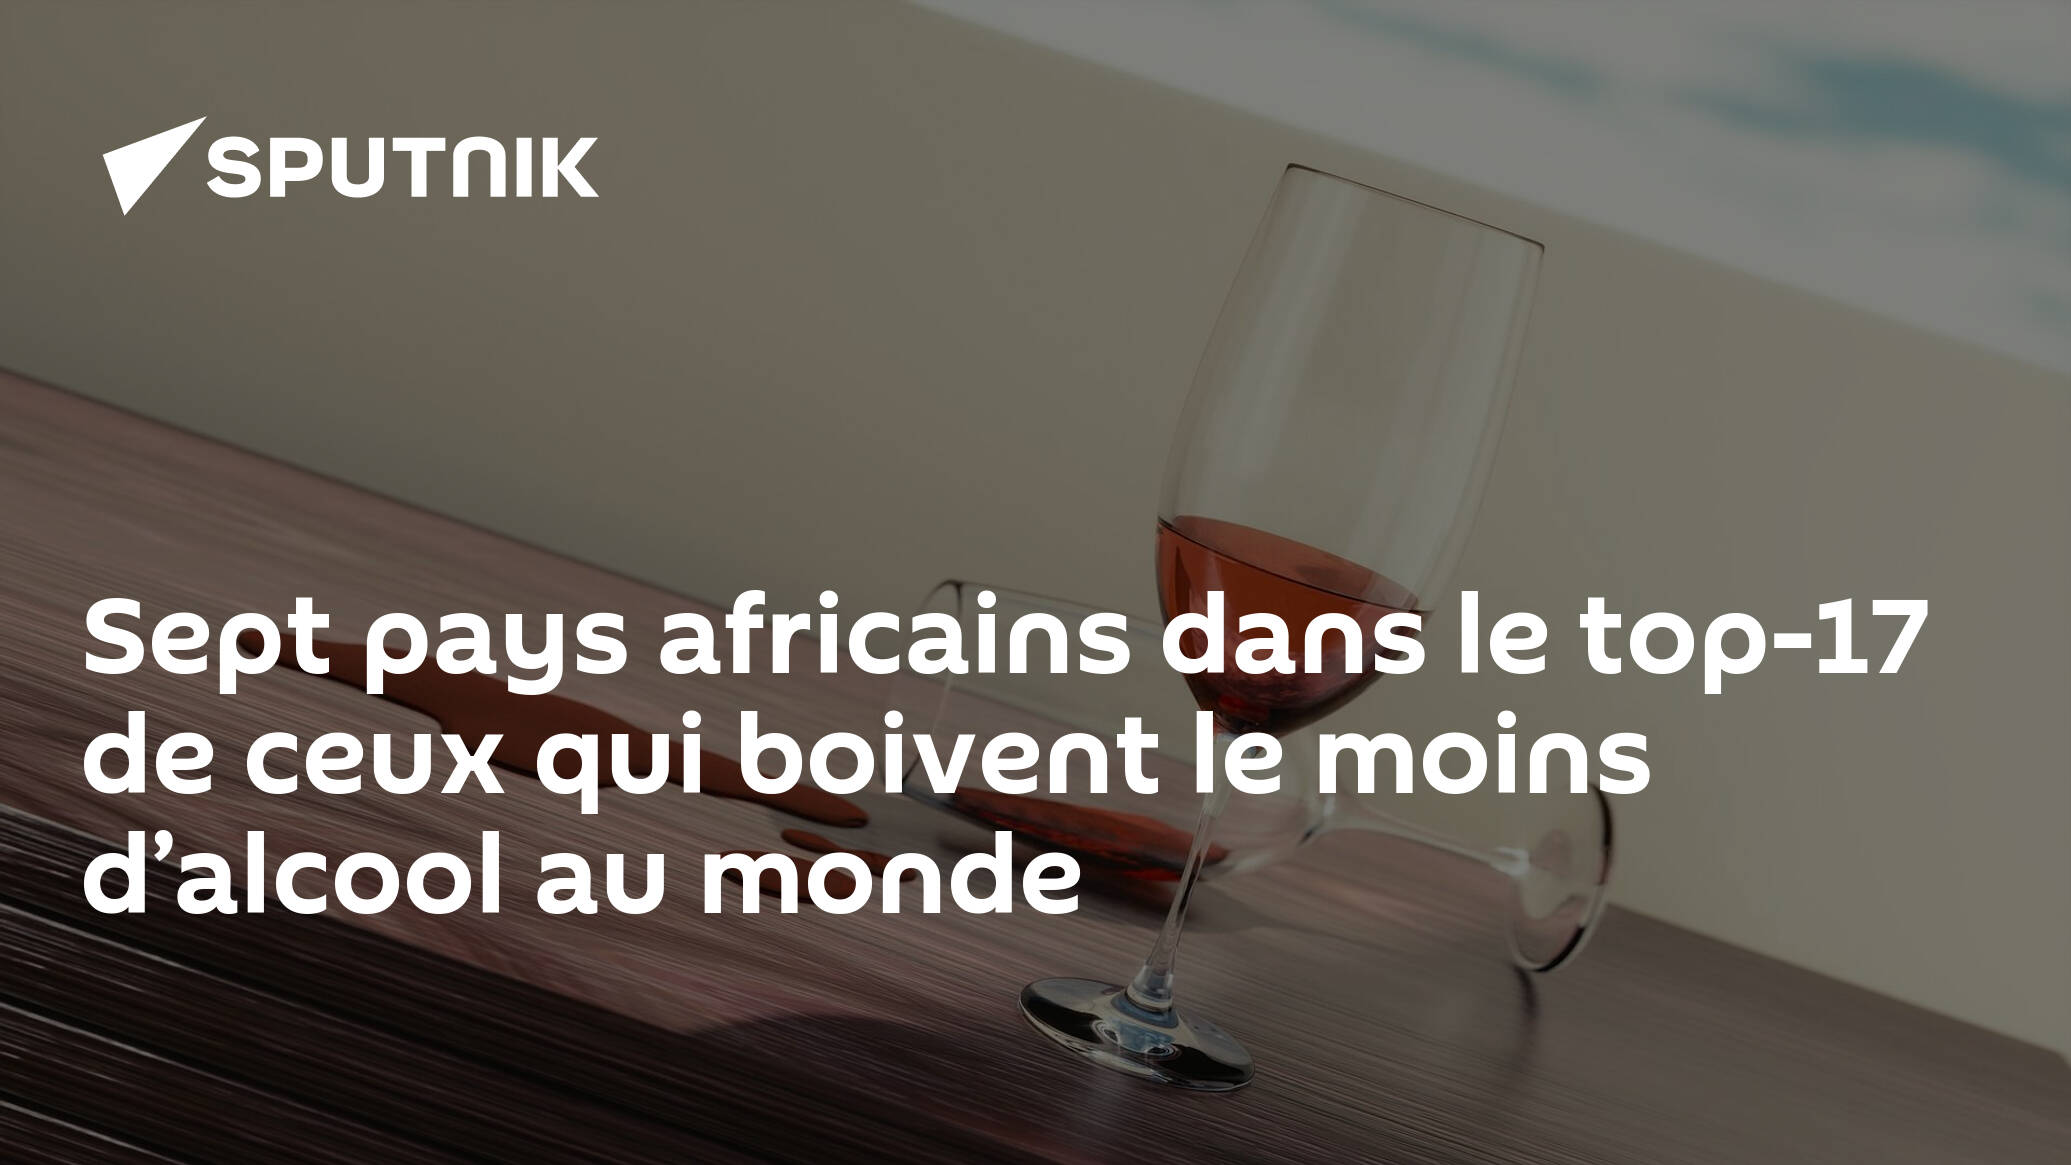 Seven African countries in the top-17 of those who drink the least amount of alcohol in the world